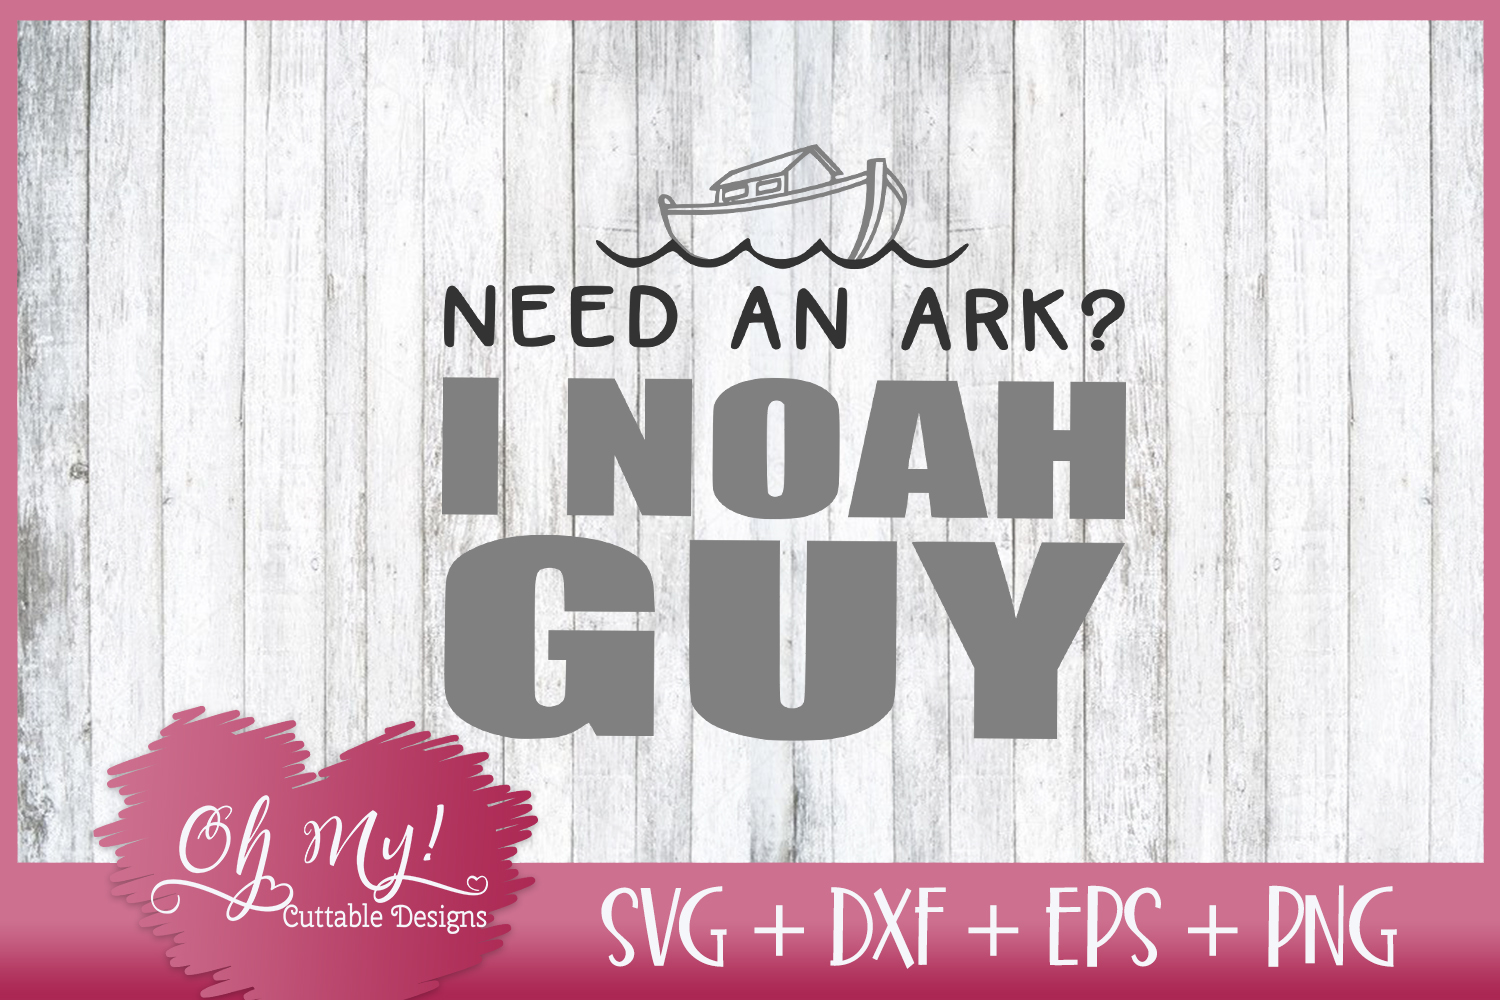 Download Need An Ark? I Noah Guy - SVG DXF EPS PNG Cut File (303623 ...